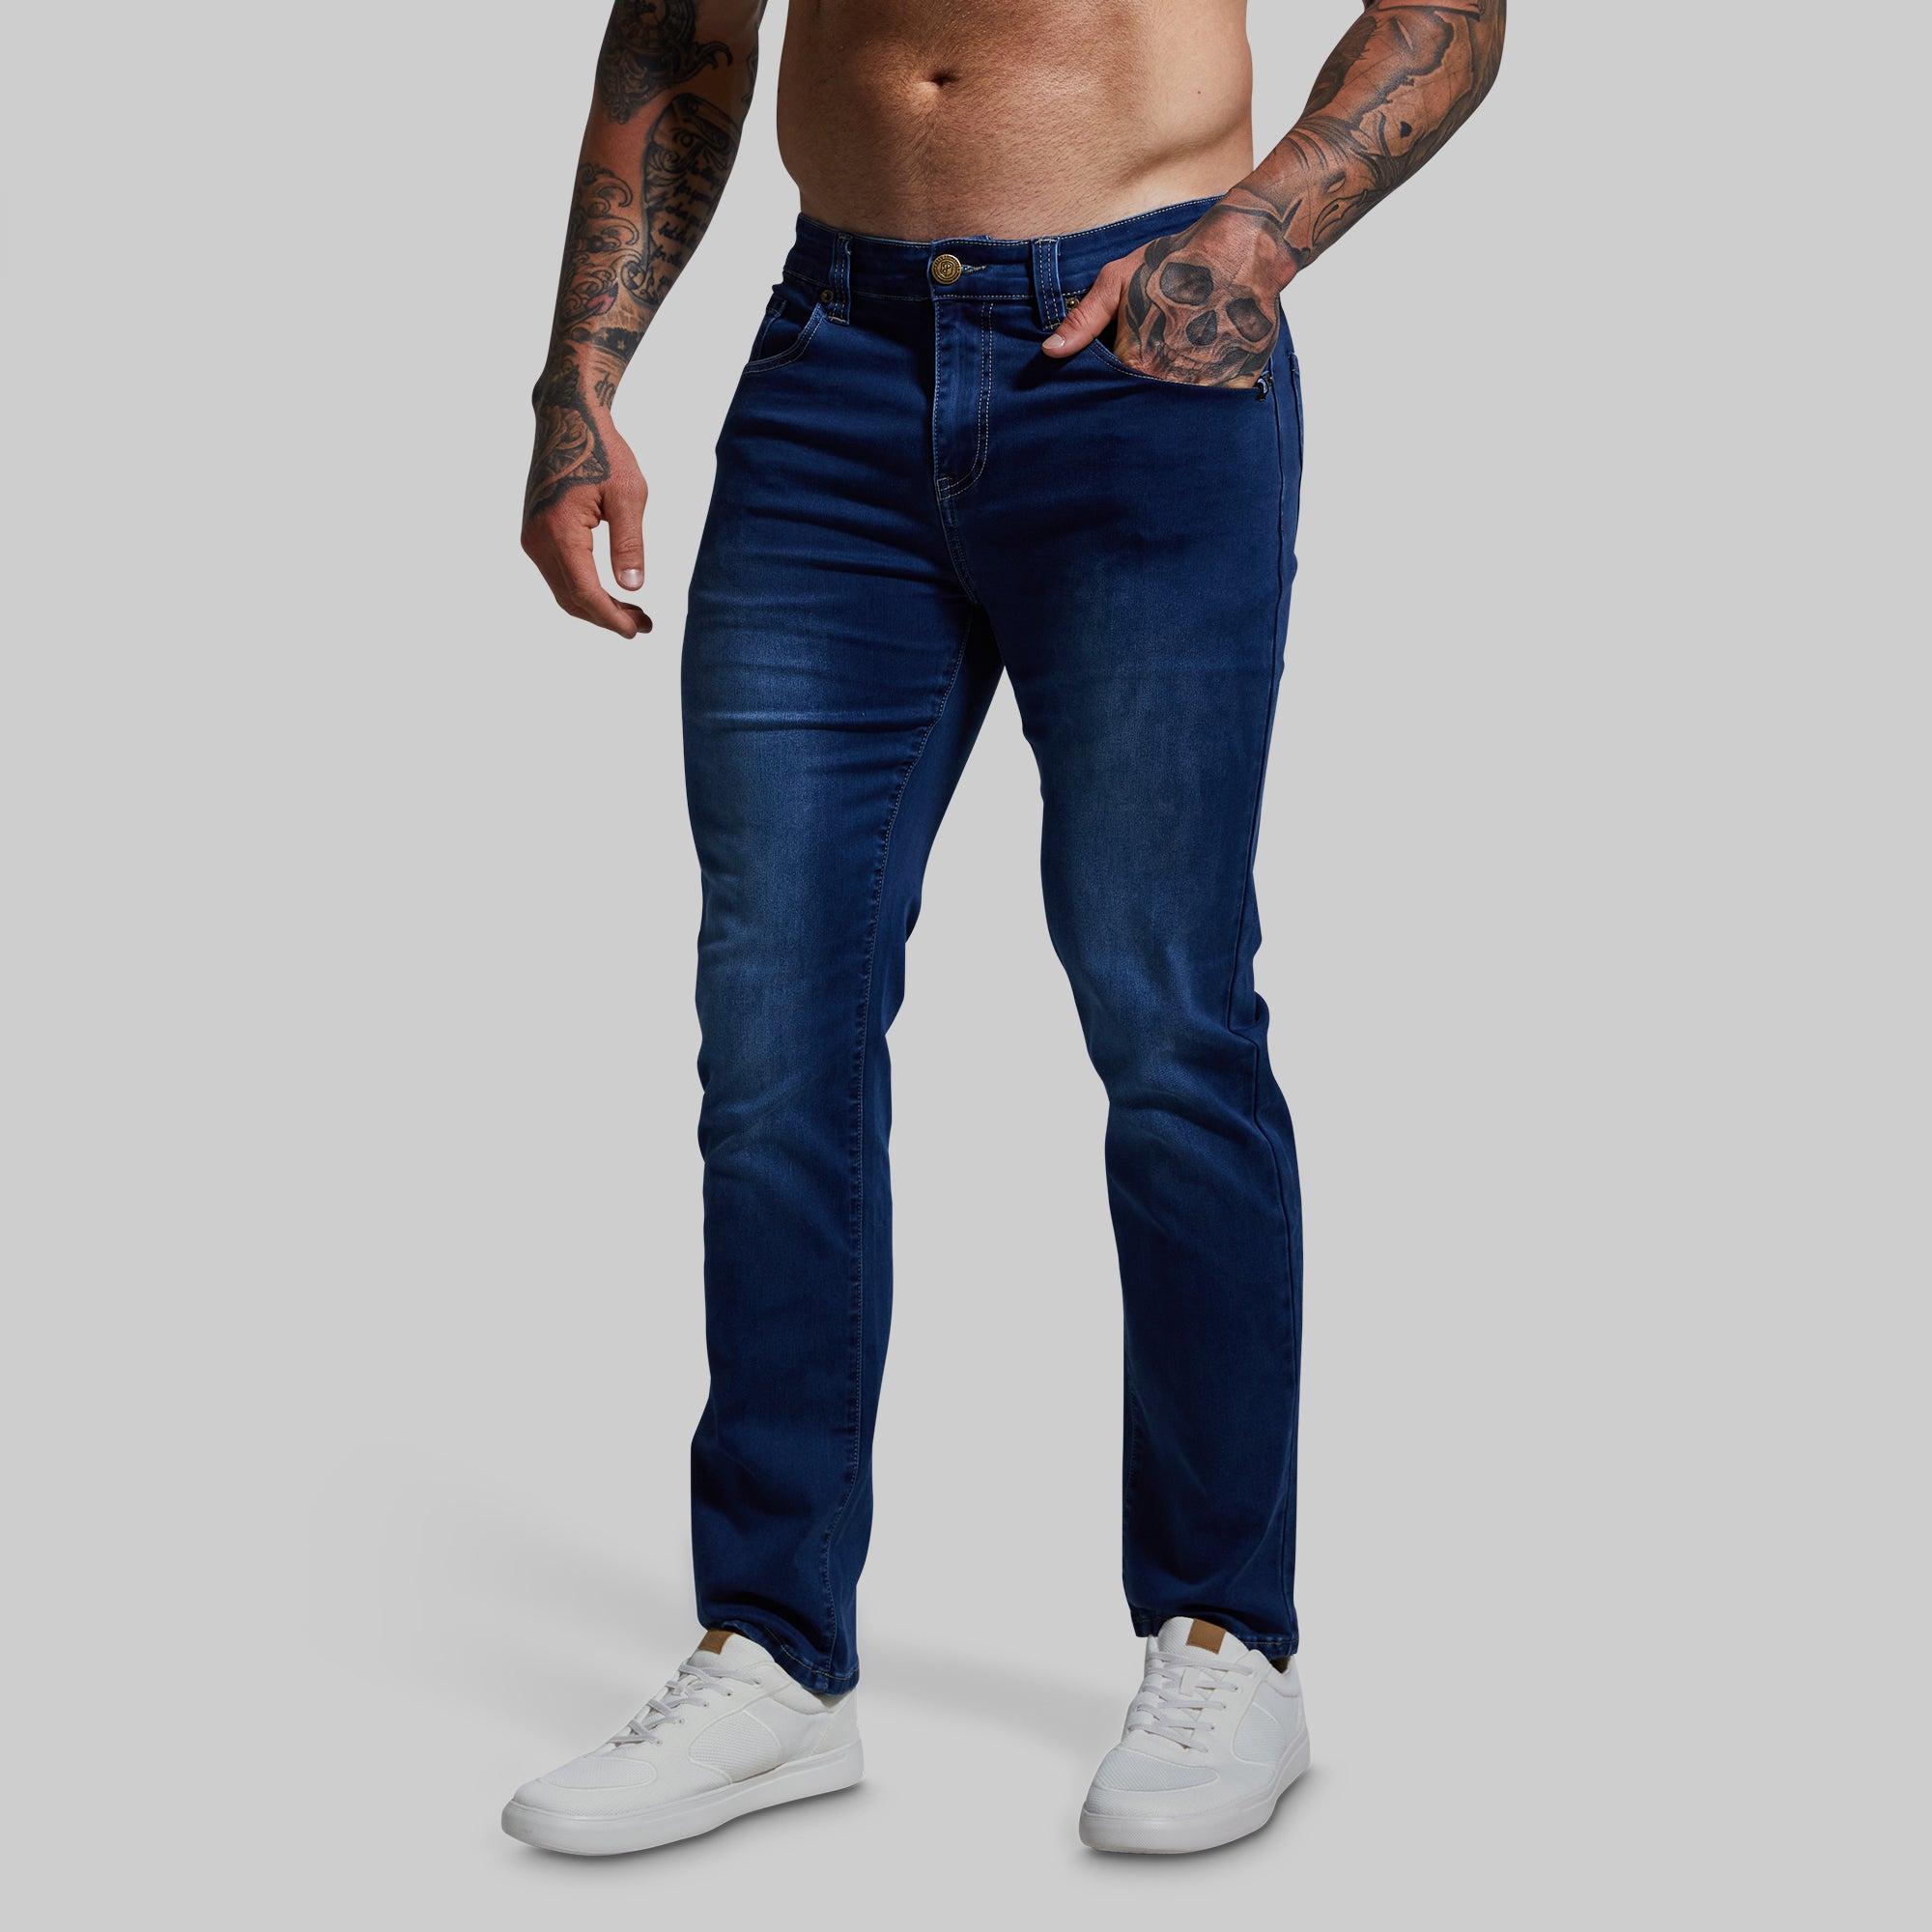 Muscle Fit Hyper Stretch Jeans  Built for Athletes that Perform